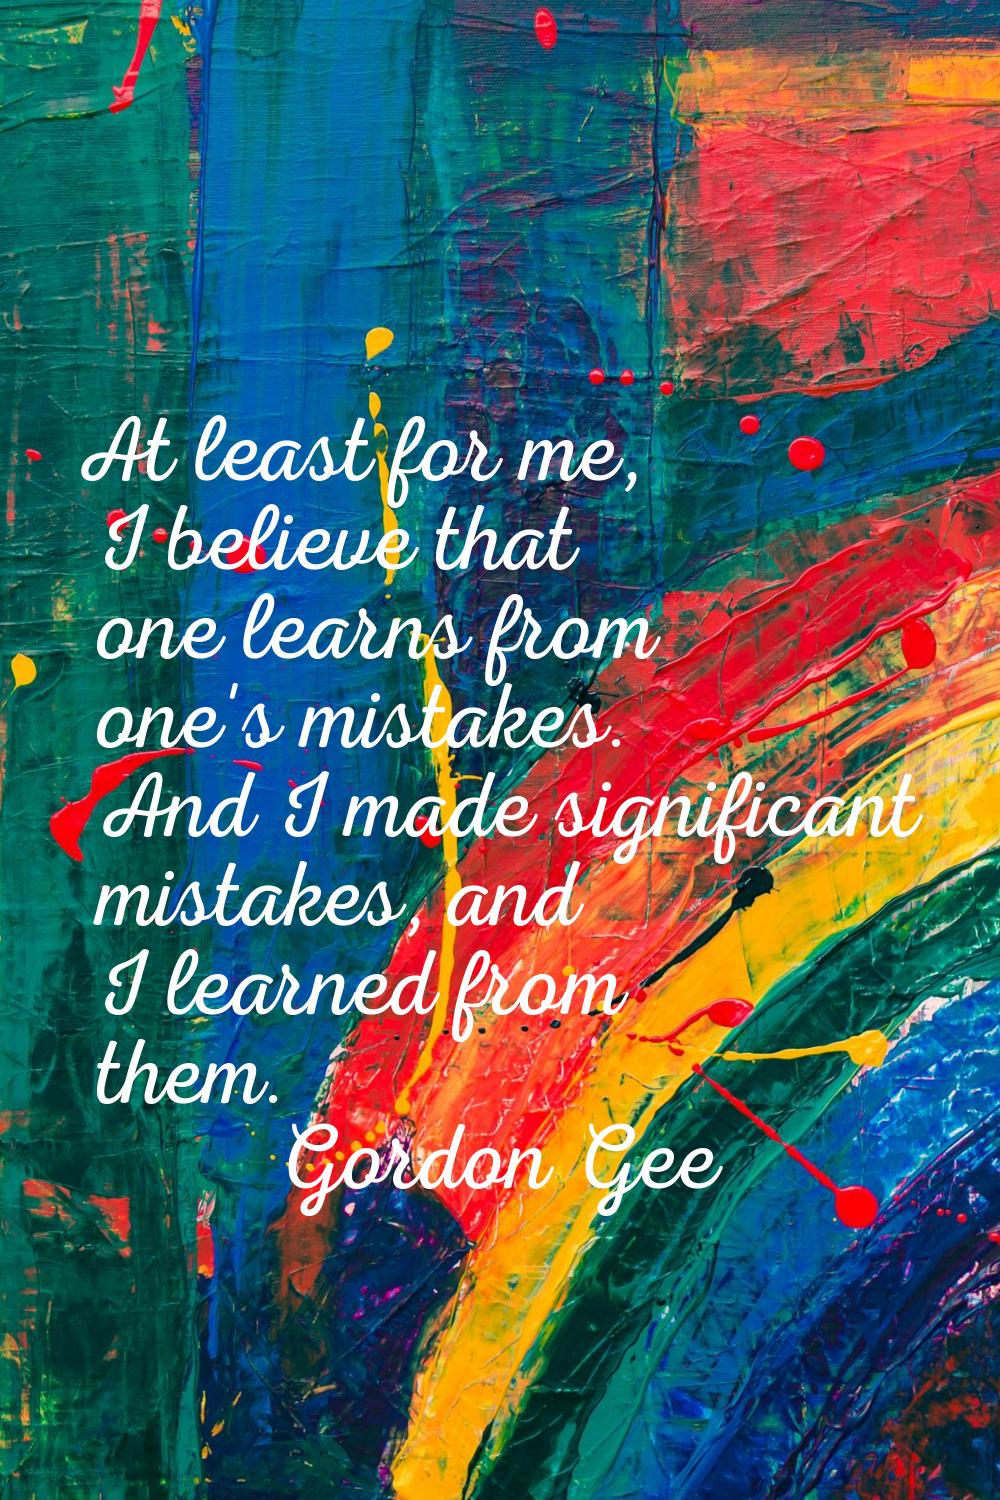 At least for me, I believe that one learns from one's mistakes. And I made significant mistakes, an